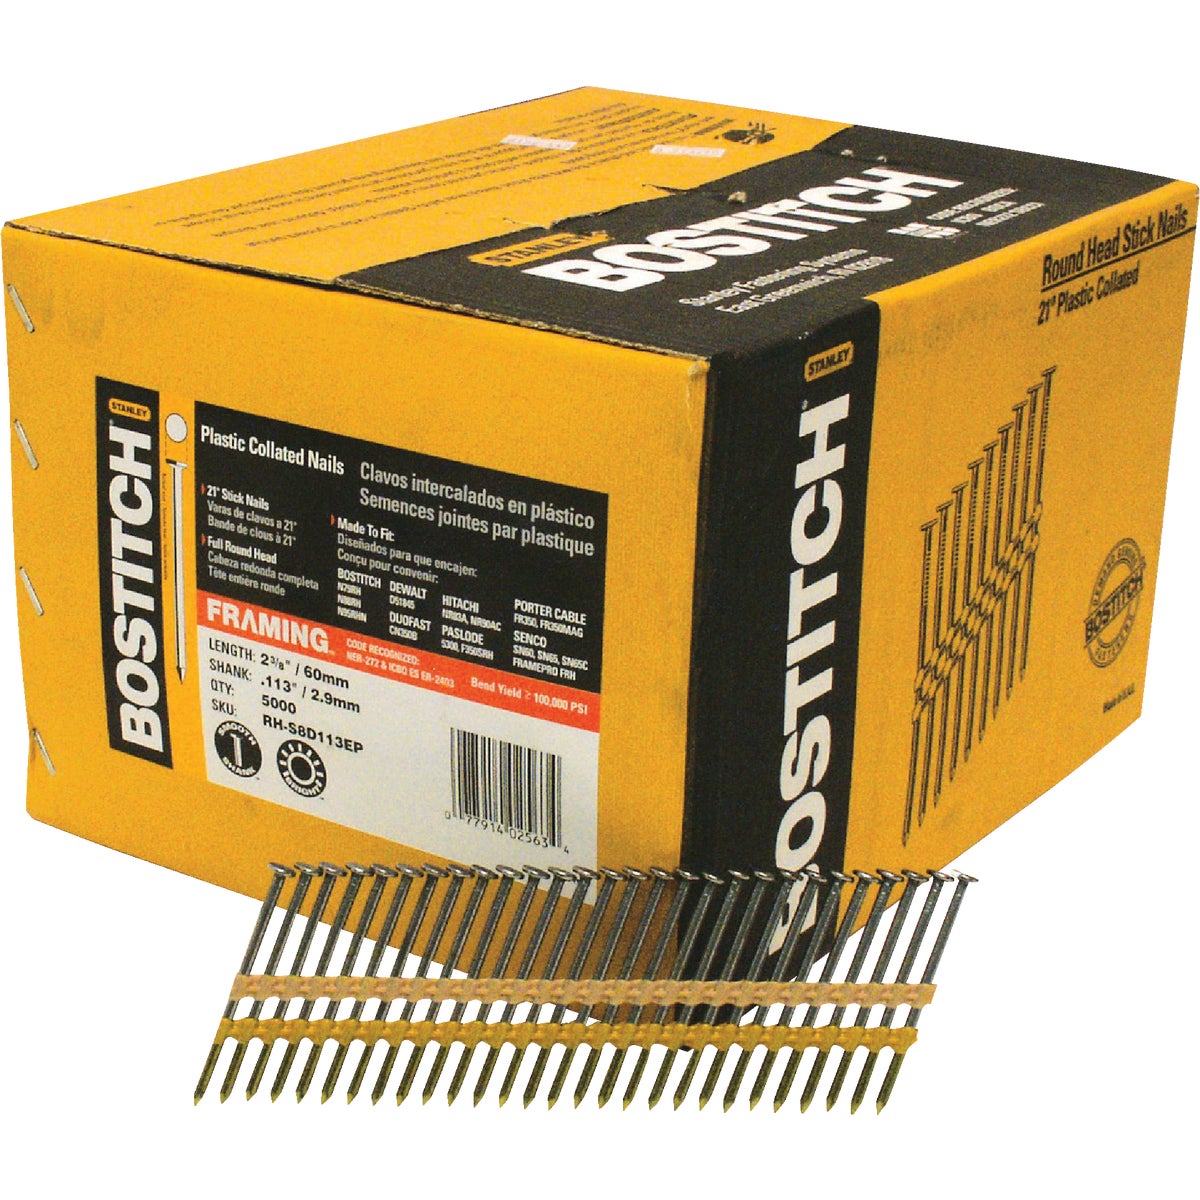 Bostitch 21 Degree Plastic Strip Coated Full Round Head Framing Stick Nails, 2-3/8 In. x .113 In. (5000 Ct.)